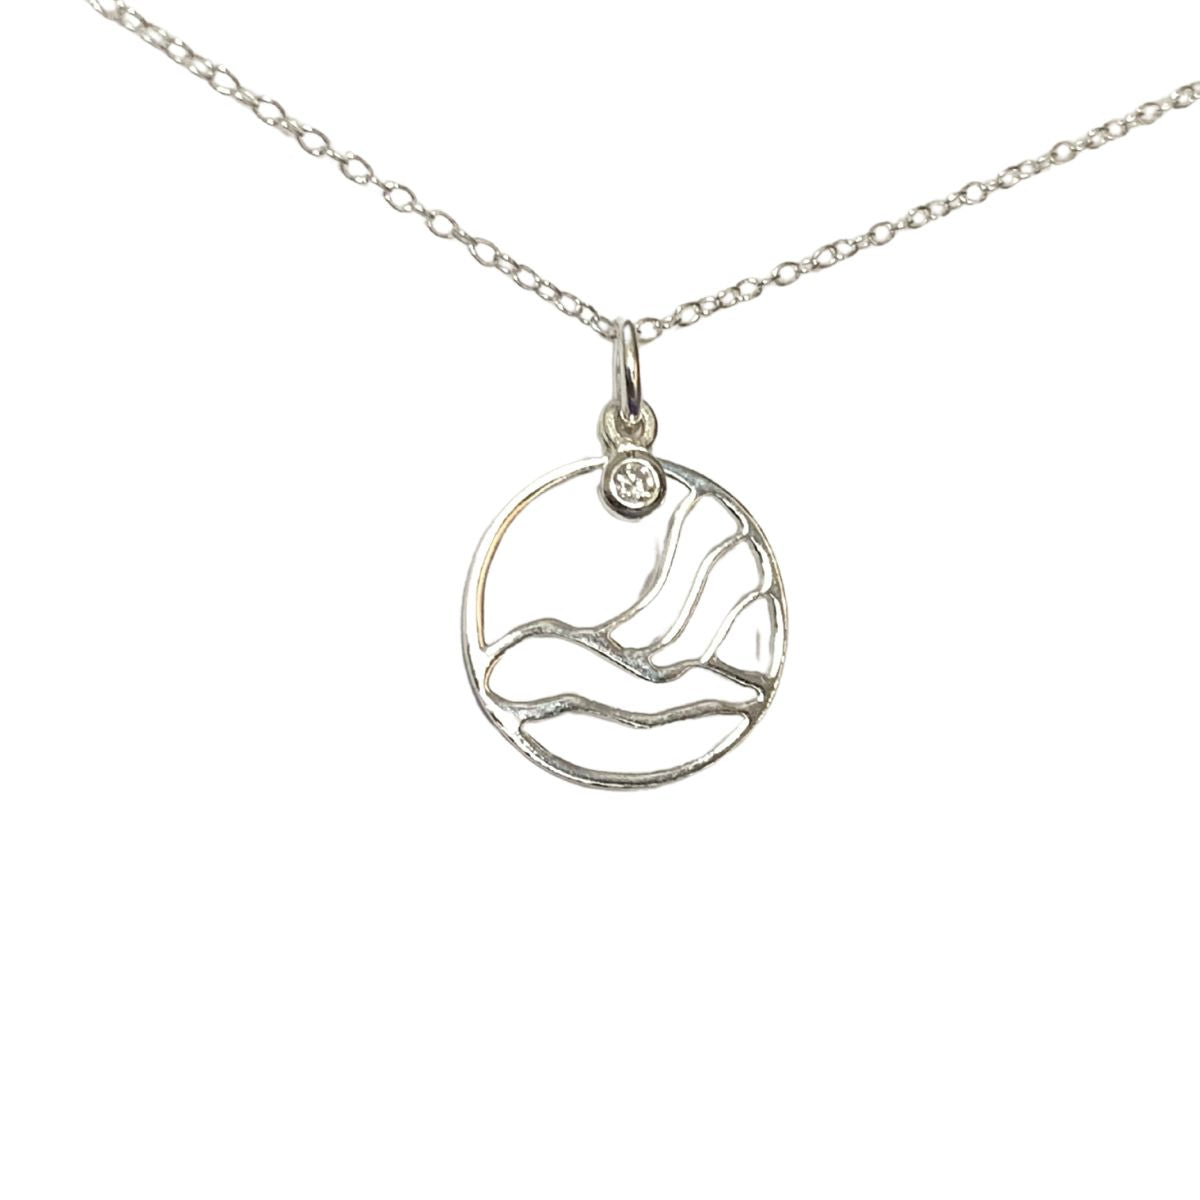 close up of northern lights inpired pendant. The pendant is round, with wavy lines deonting the land and 3 wavy lines representing the northern lights. There is a small round clear crystal at the top of the pendant. It hangs on a silver chain.